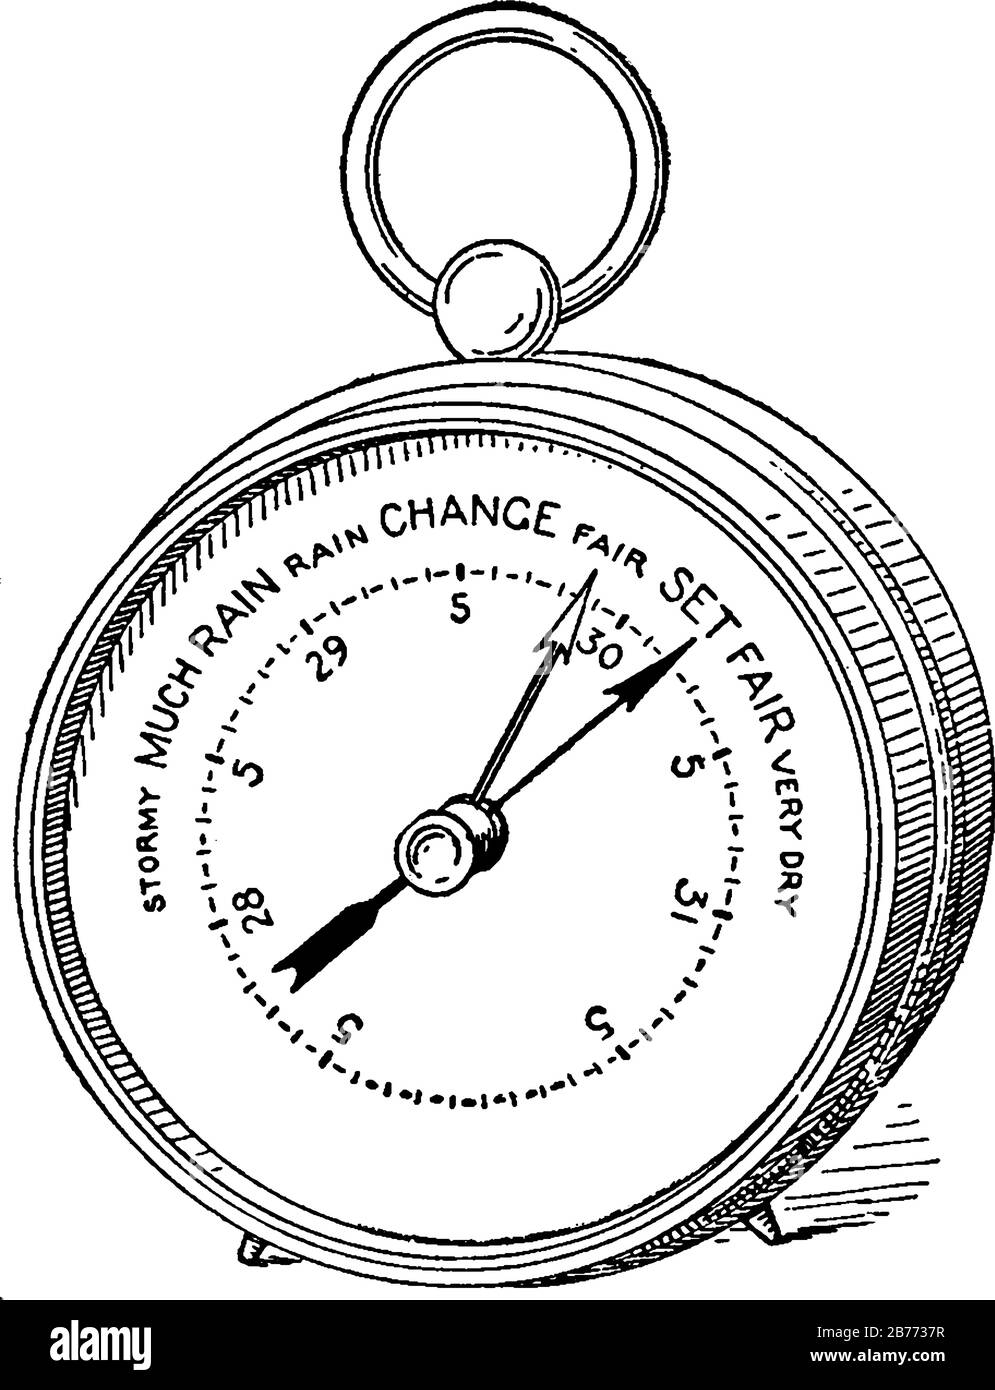 What is an Aneroid barometer Draw a neat labelled diagram to explain its  construction and working